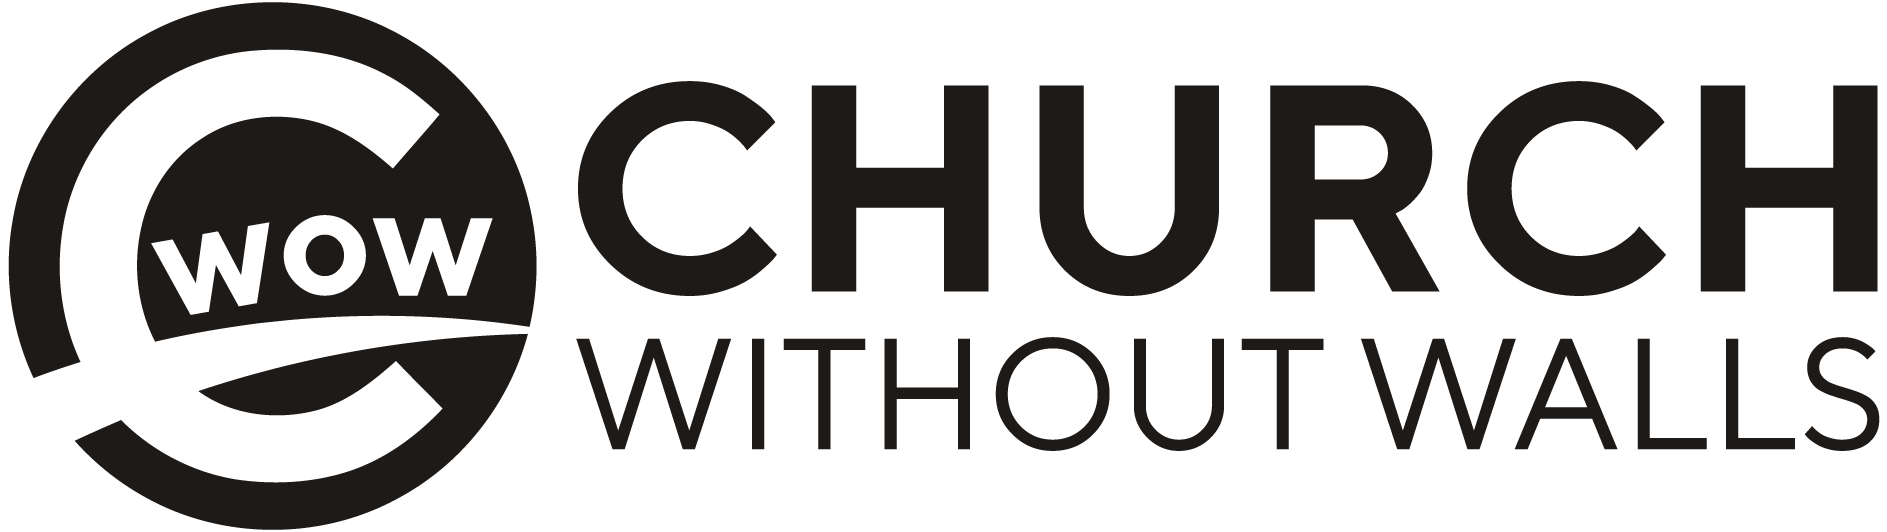 Church-Without-Walls-Logo-Black-Color-2